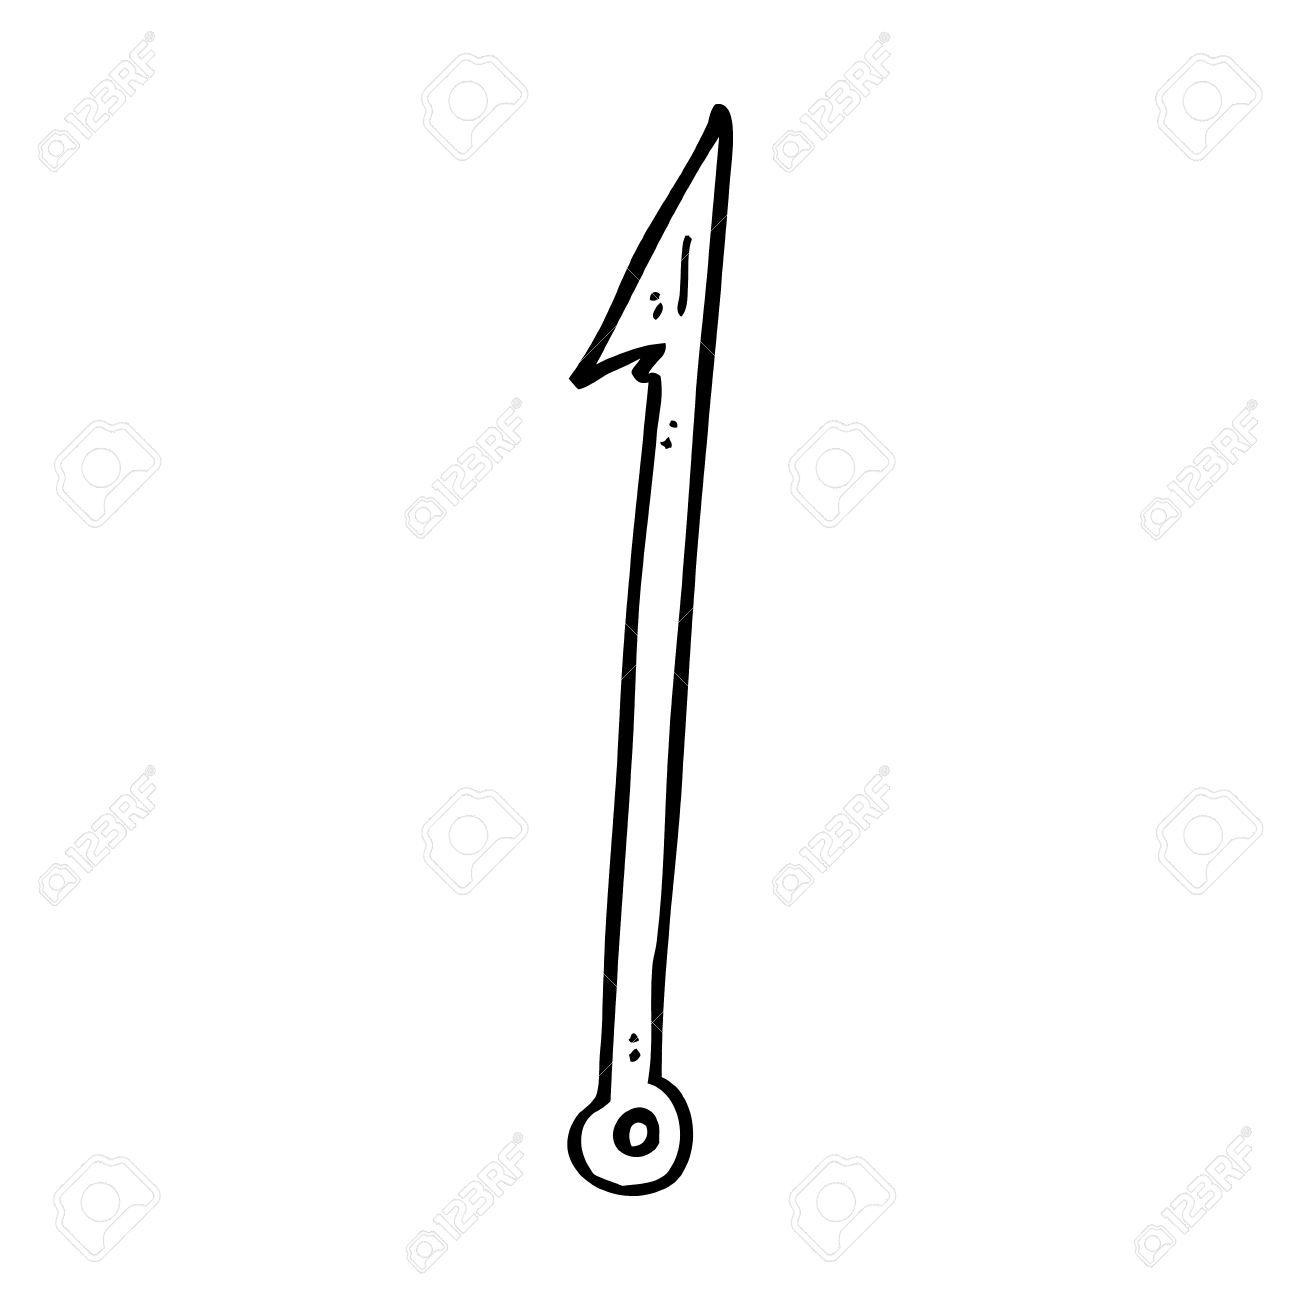 Harpoon clipart #11, Download drawings